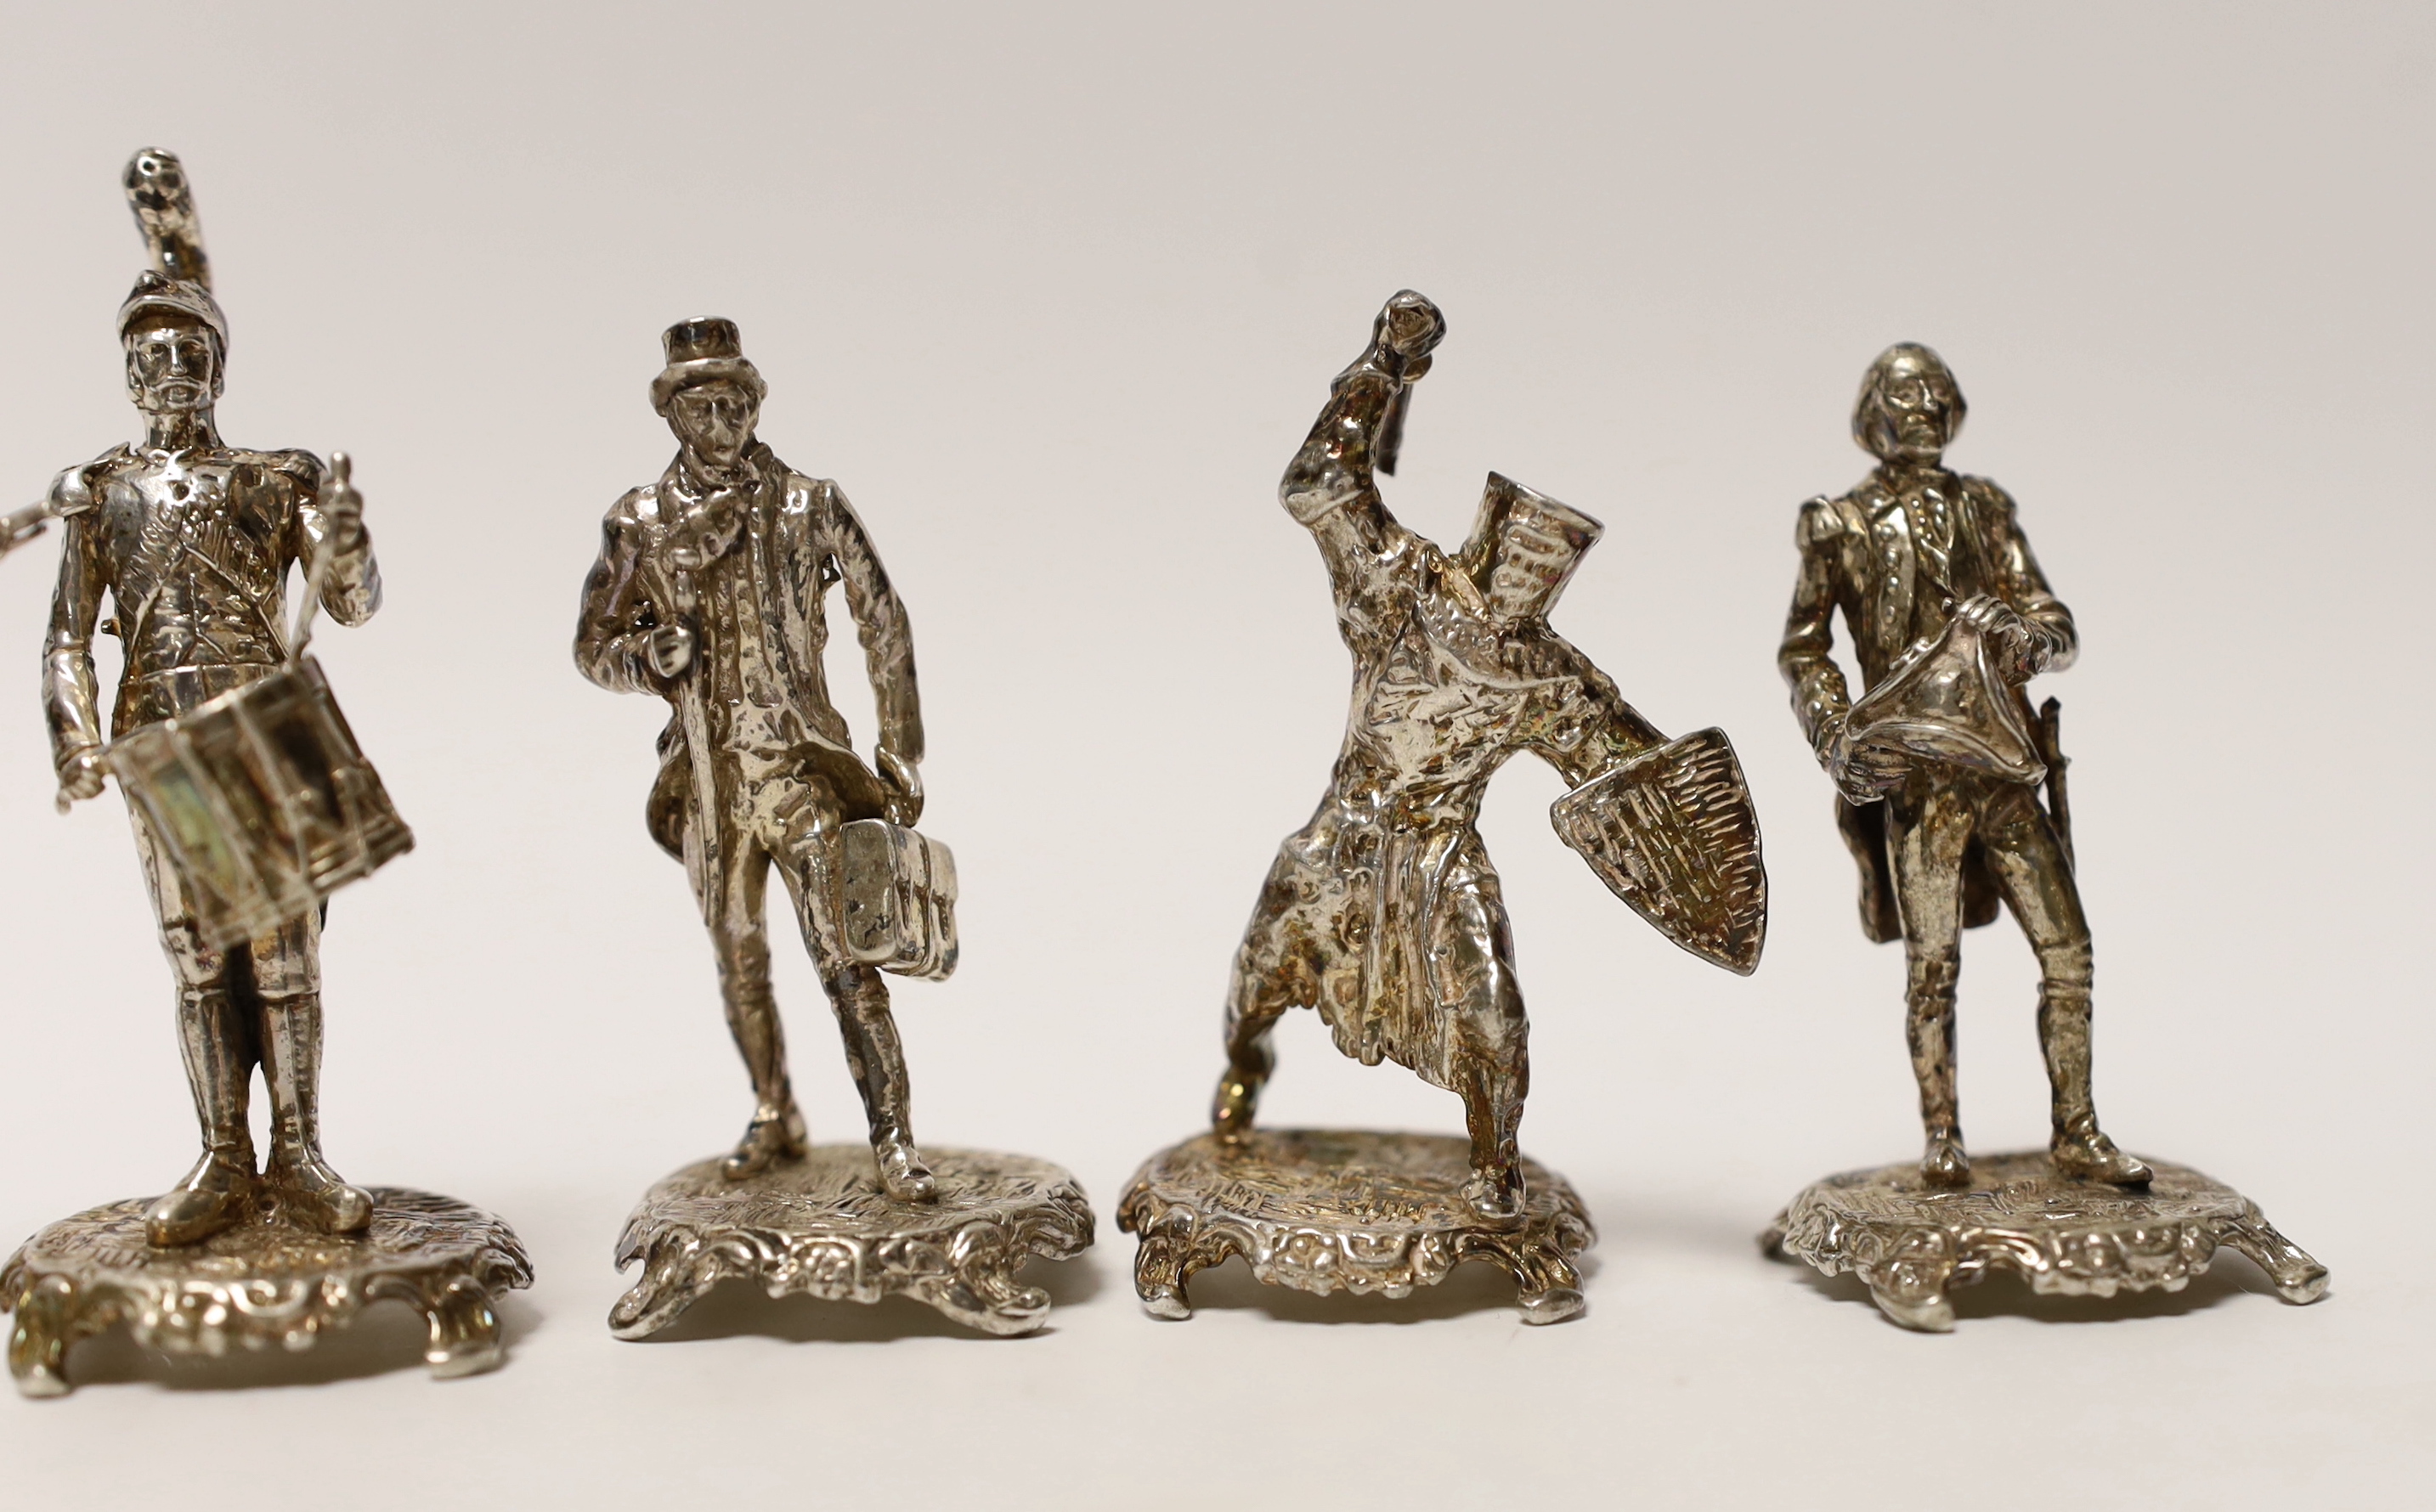 A set of five miniature silver model soldiers, maker SMC, London, 1975, tallest 75mm, together with a silver miniature model of an awl, same date and maker.